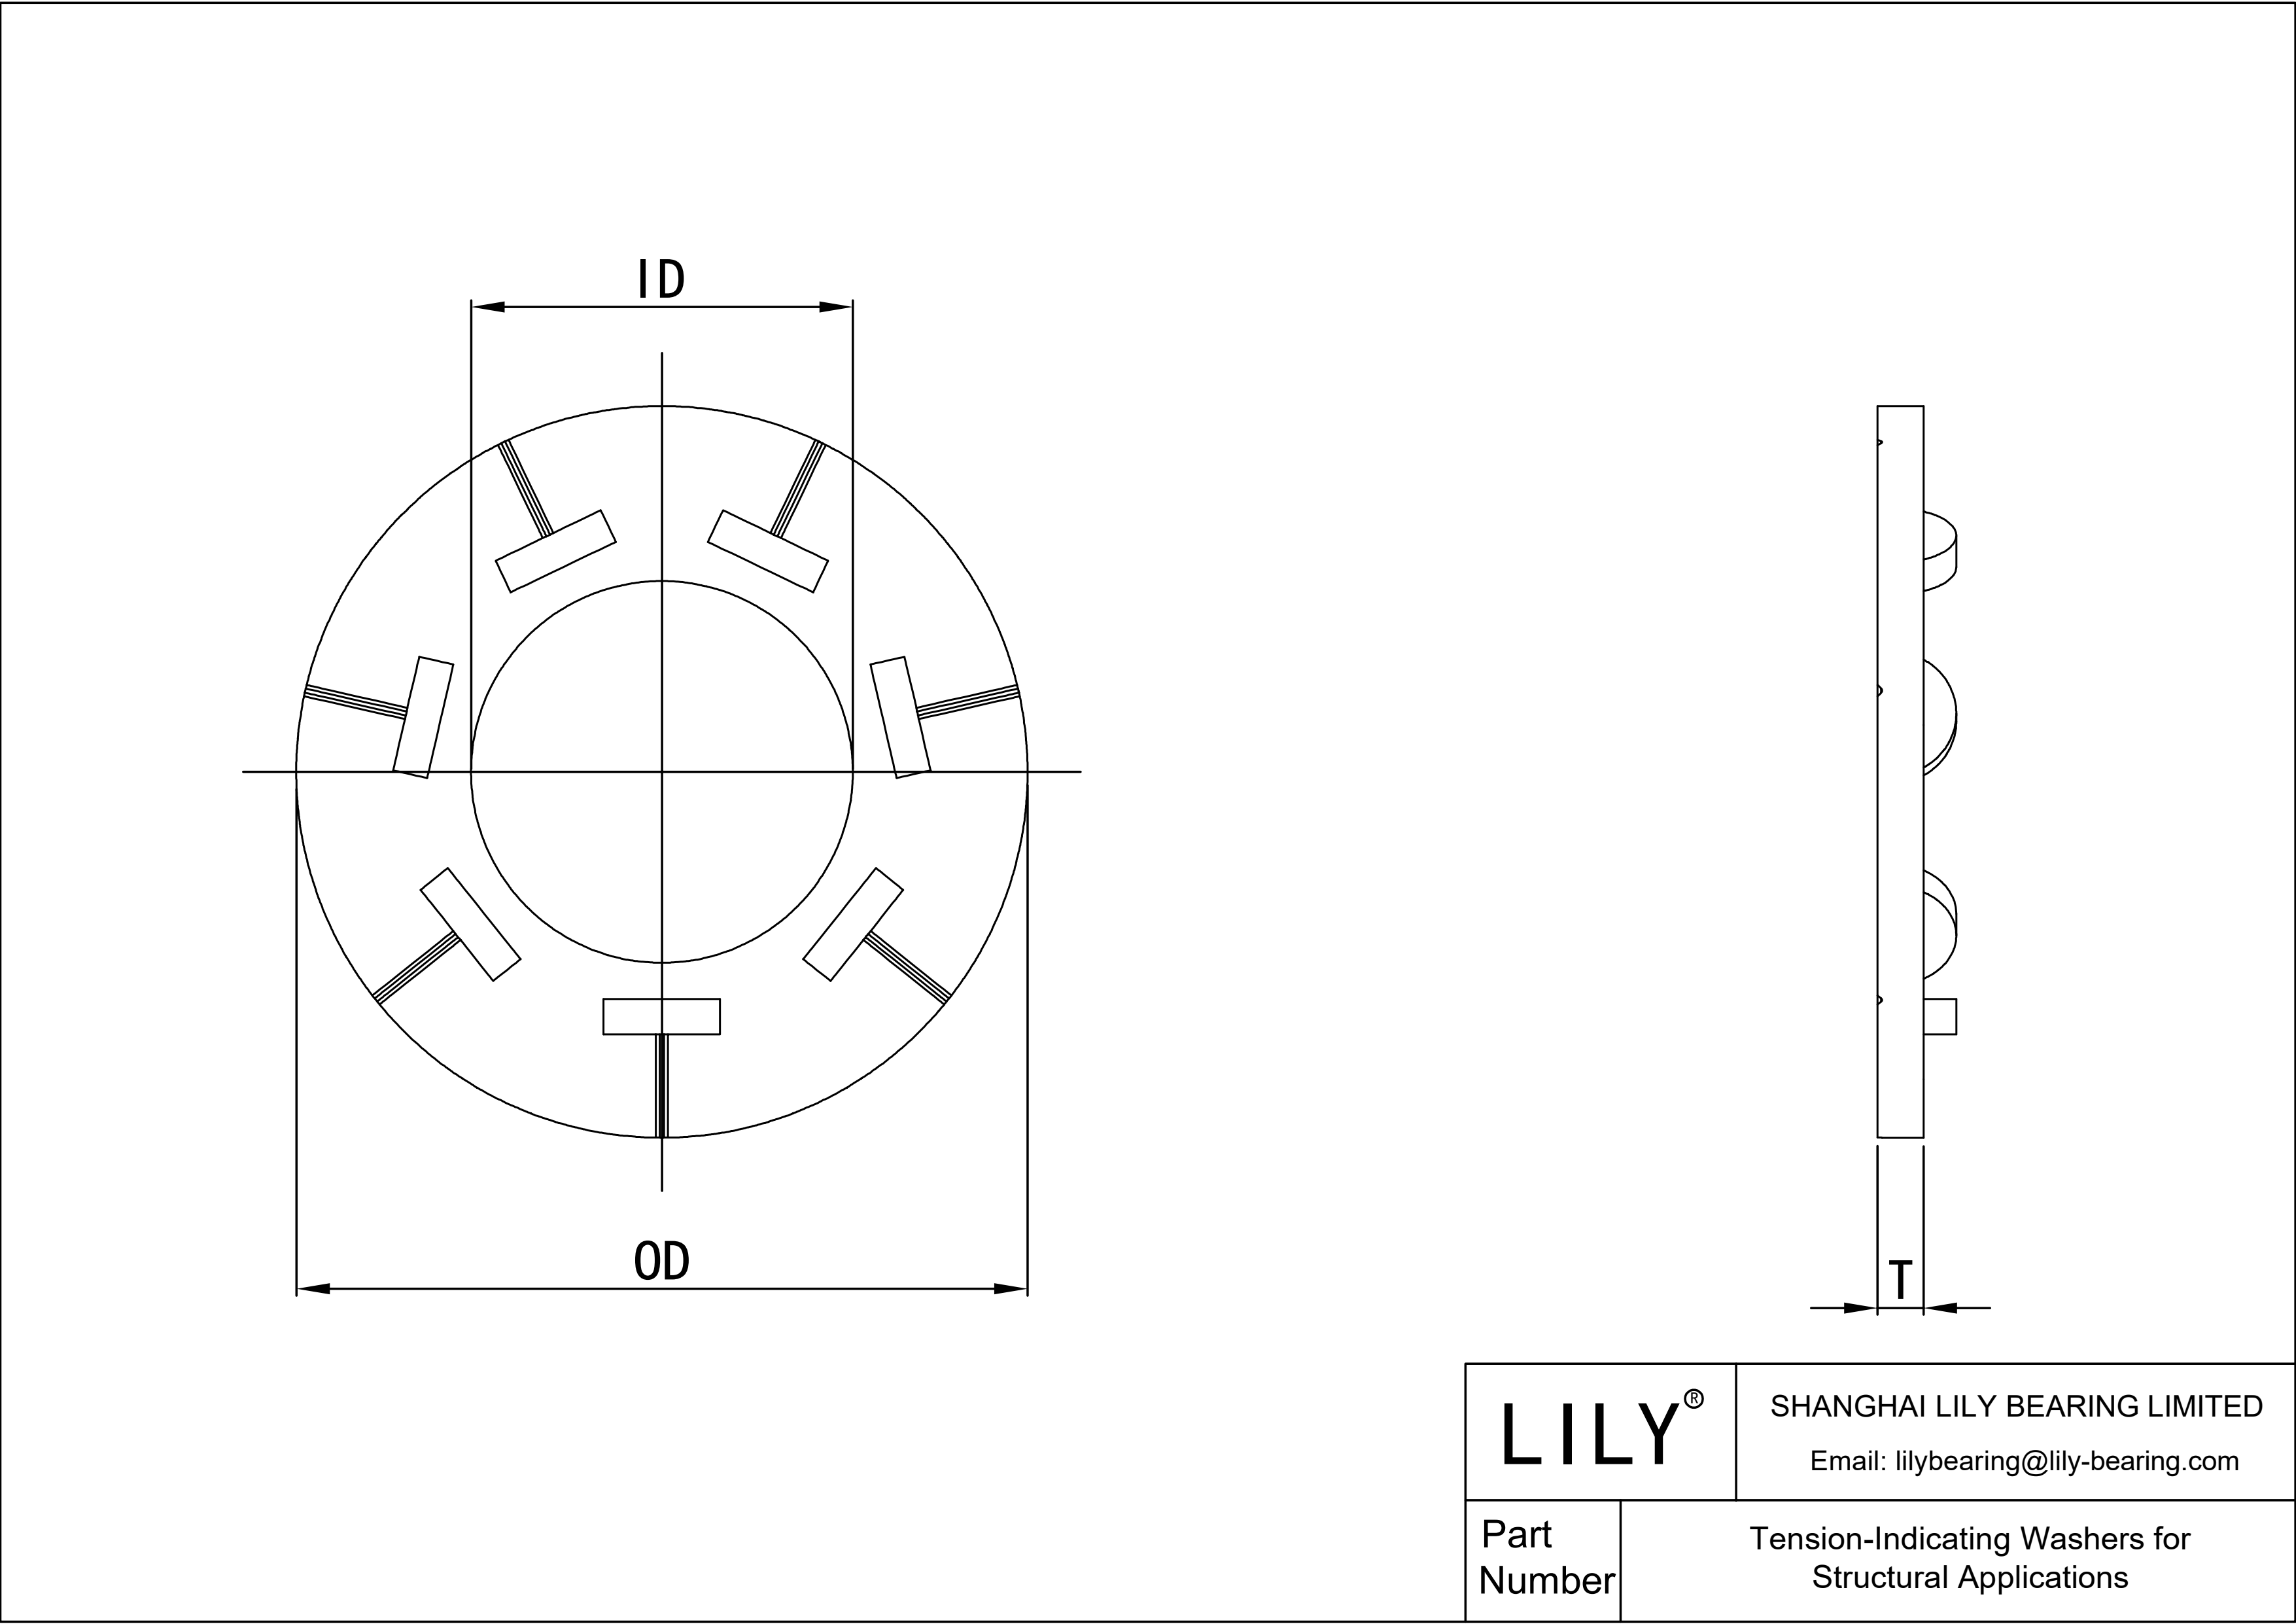 JBDFIAACA Tension-Indicating Washers for Structural Applications cad drawing